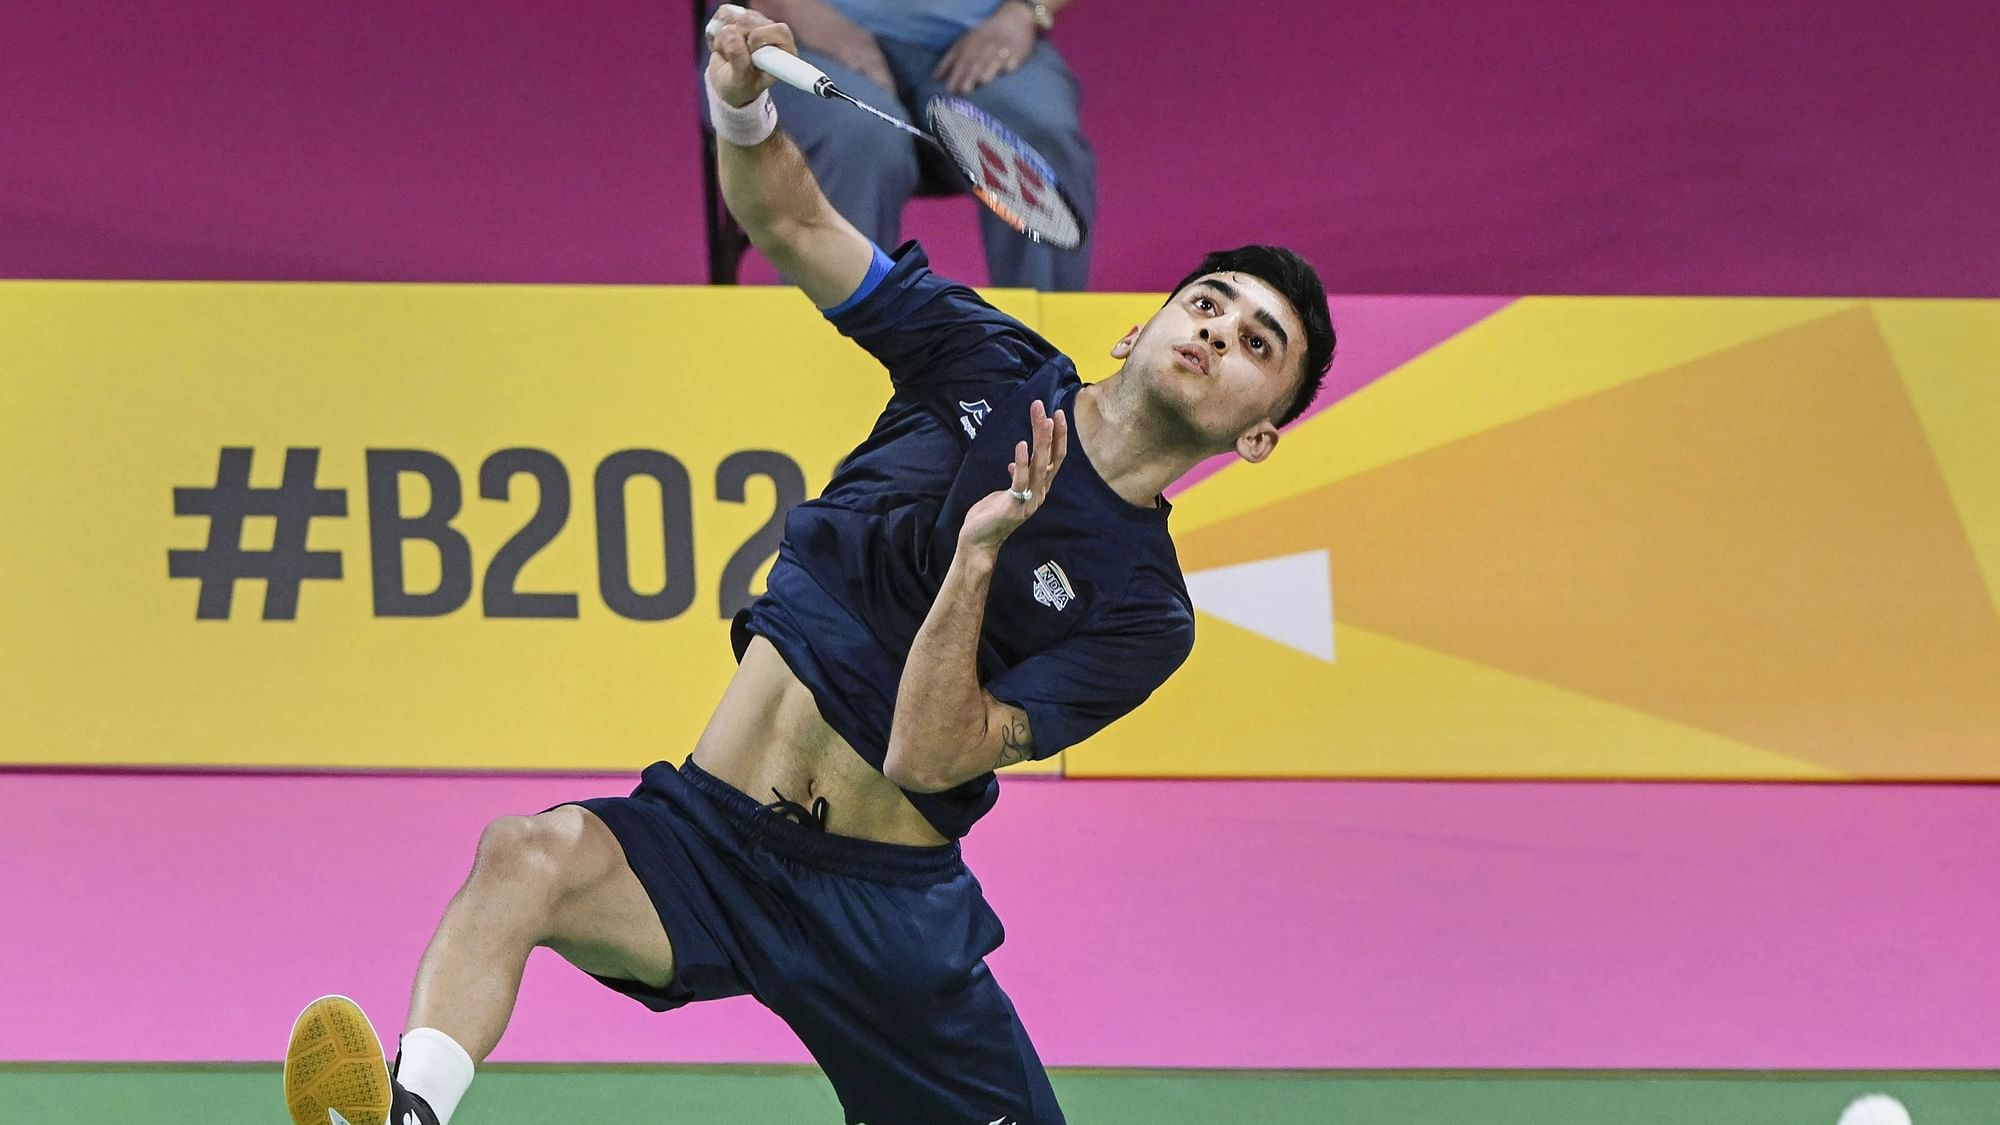 <div class="paragraphs"><p>India's Lakshya Sen won the the men's singles gold in badminton at the 2022 Commonwealth Games in Birmingham on Monday.&nbsp;</p></div>